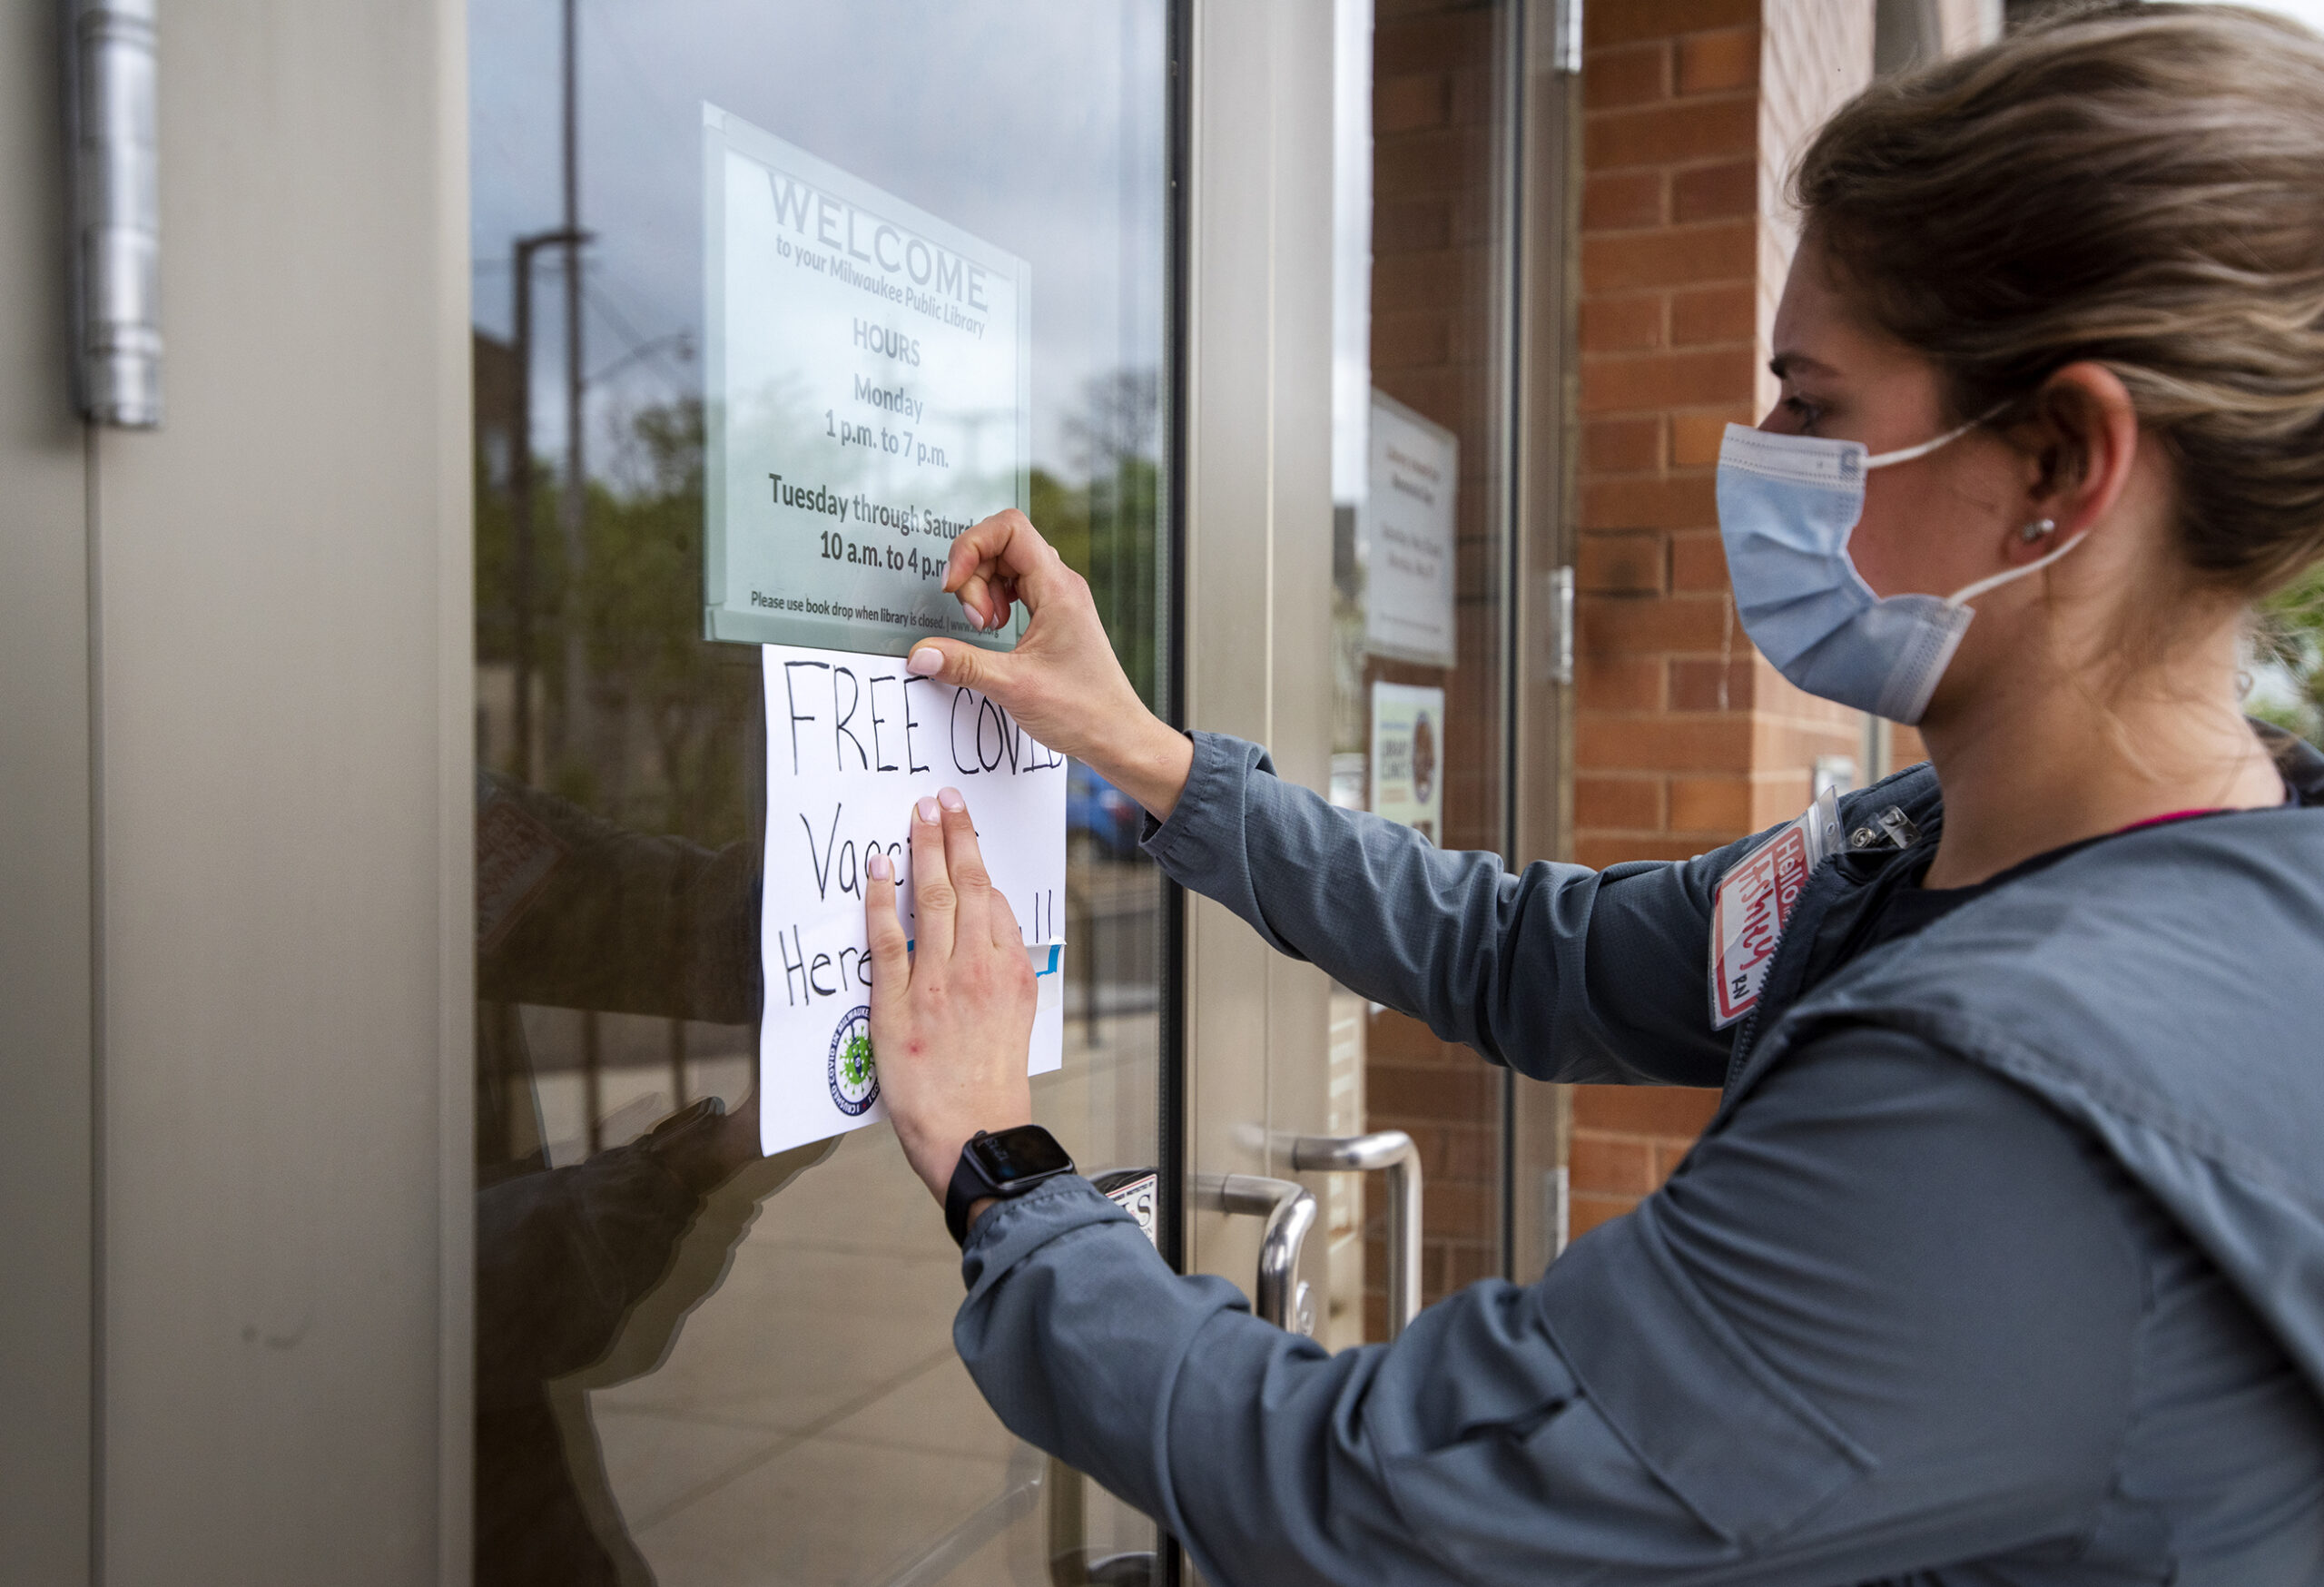 A nurse hangs a sign on a glass door that says "Free COVID-19 Vaccines Here"